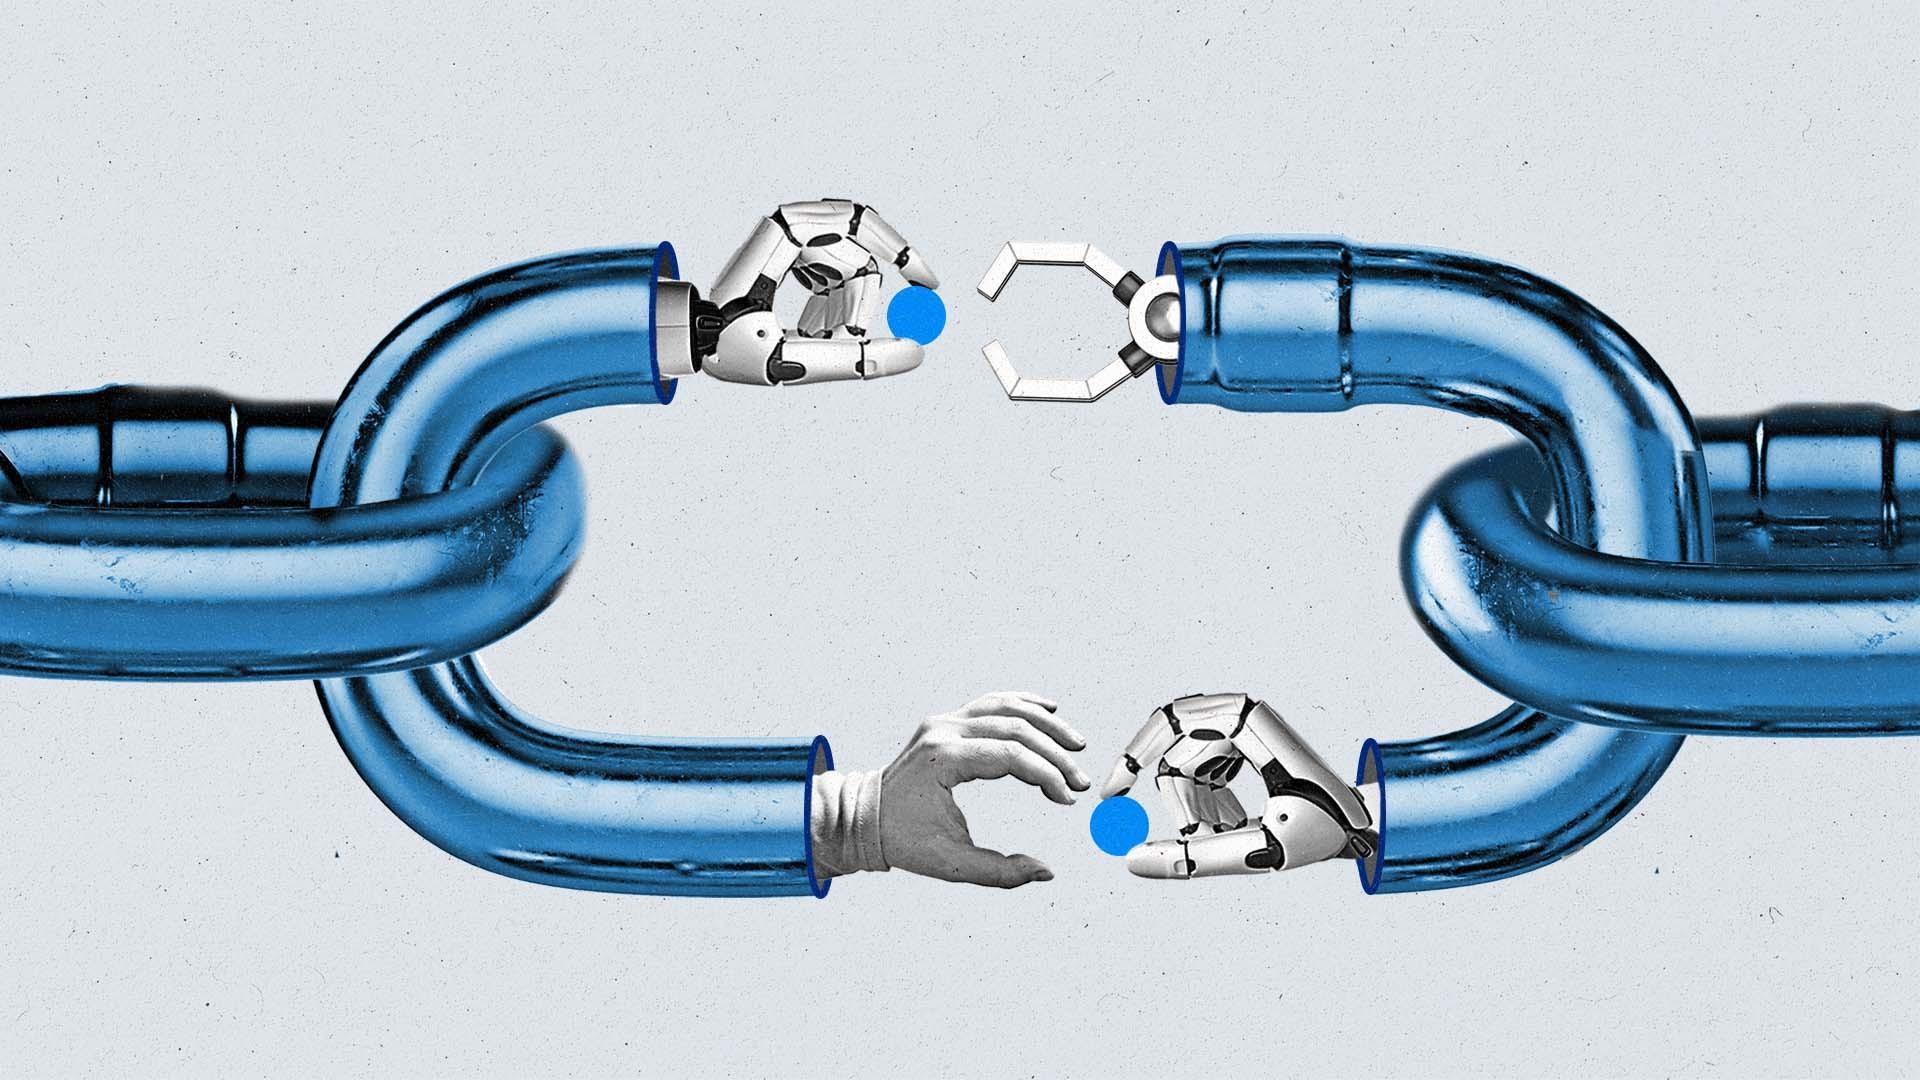 A chain link split in half reveals sets of organic and artificial hands exchanging a blue circle.